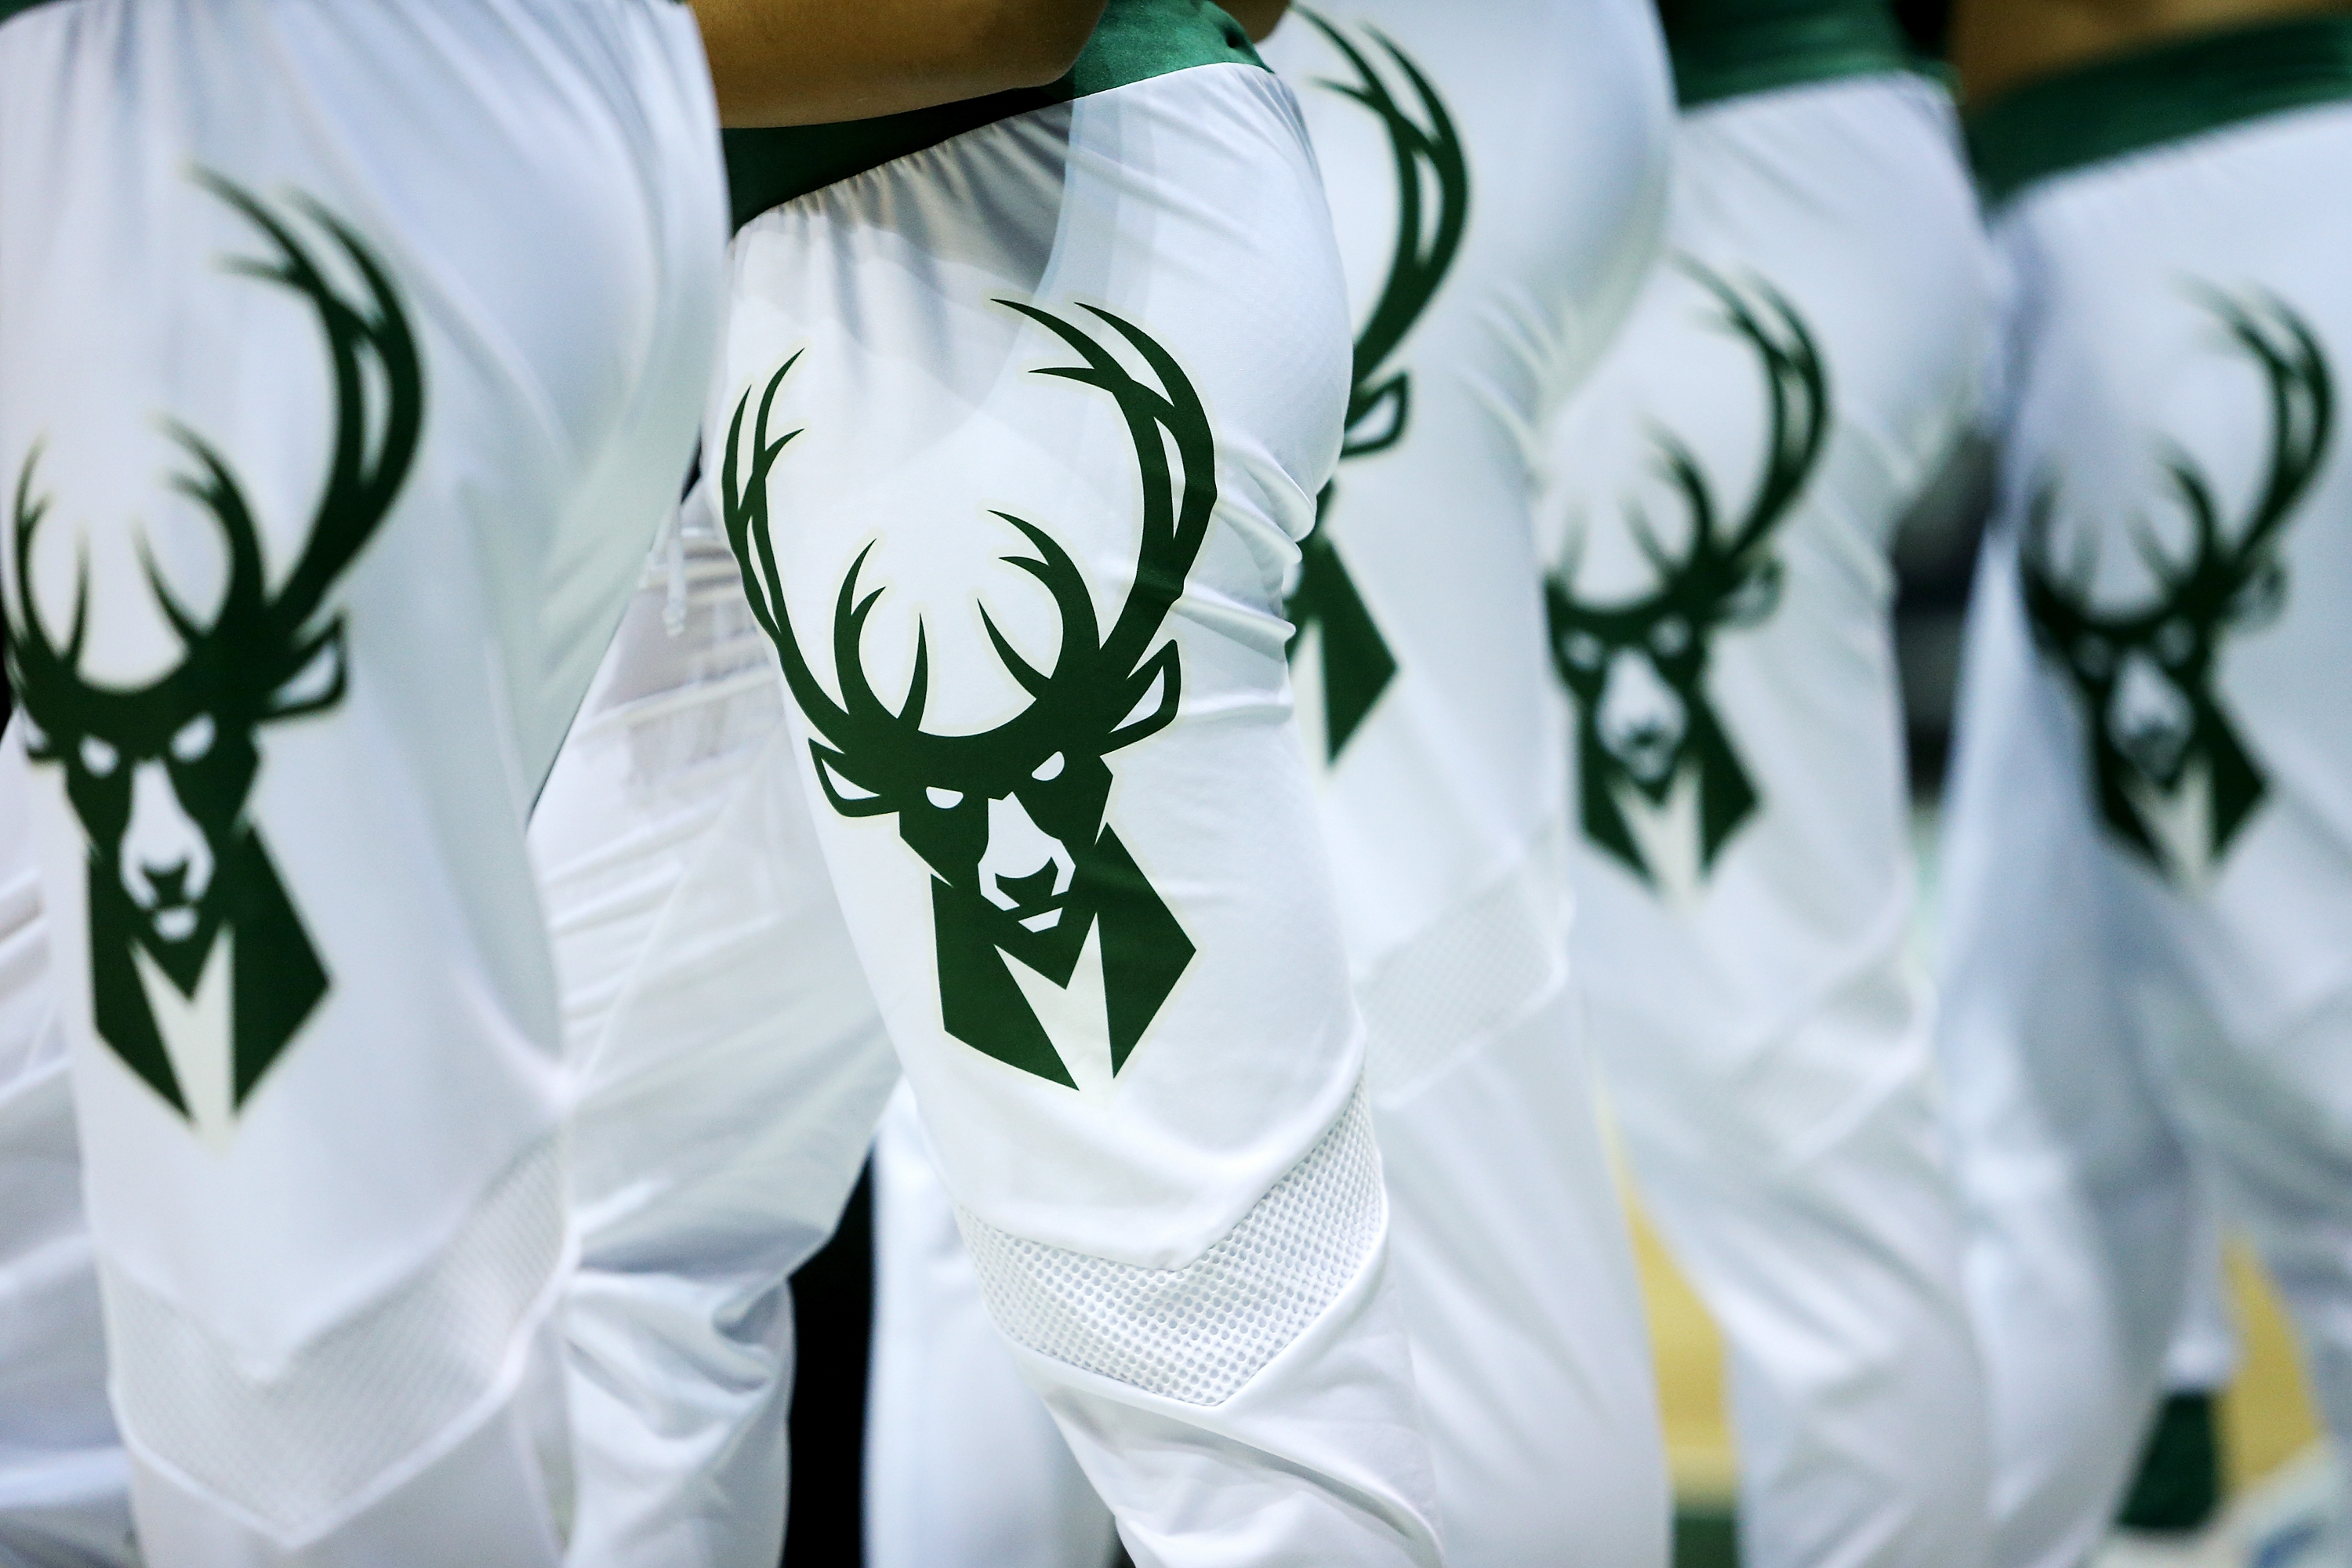 Bucks unveil throwback uniforms for 'Return to the MECCA' game